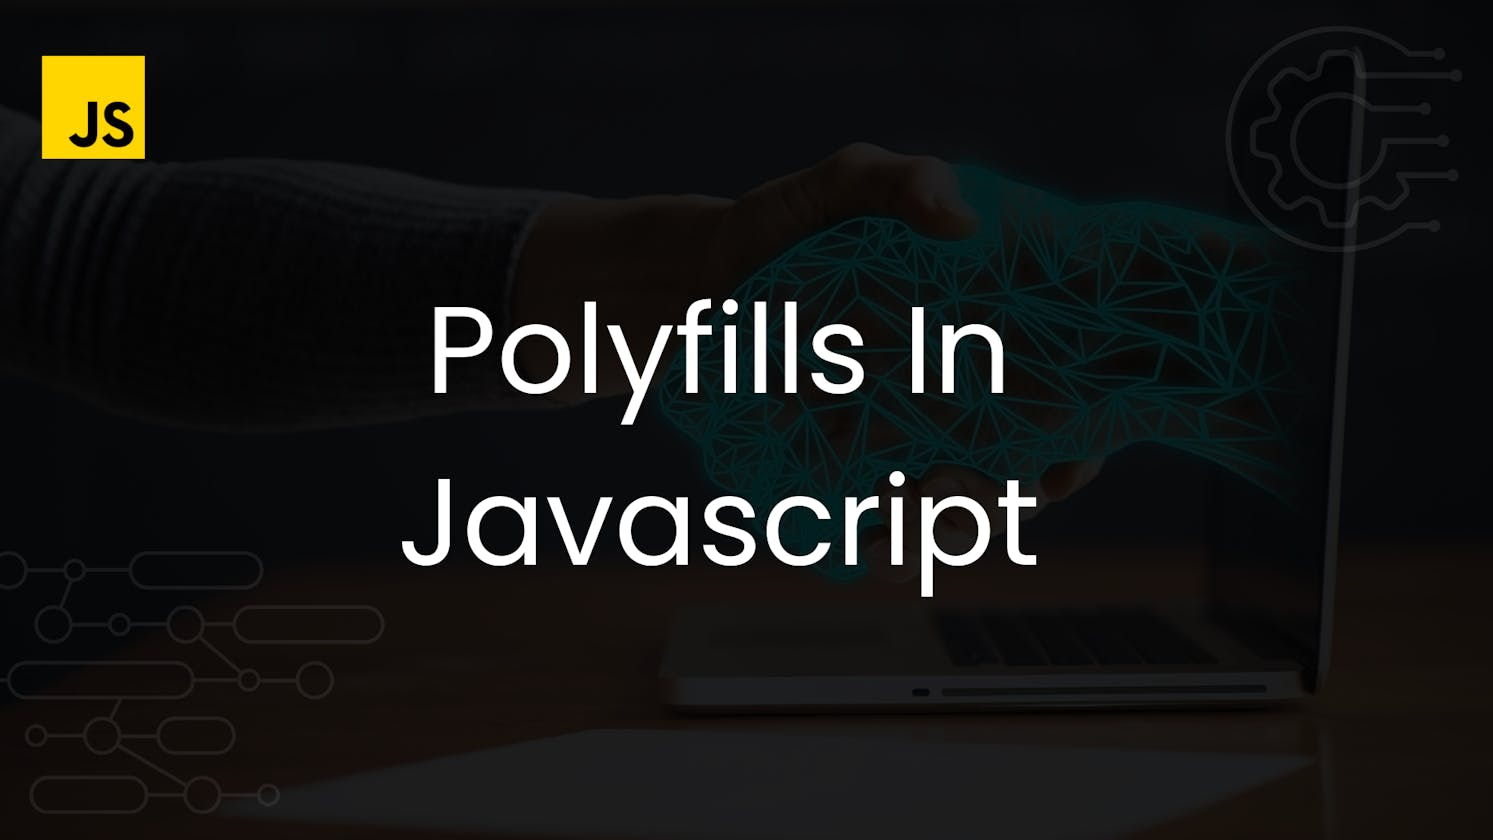 Do you know Polyfills in Javascript?